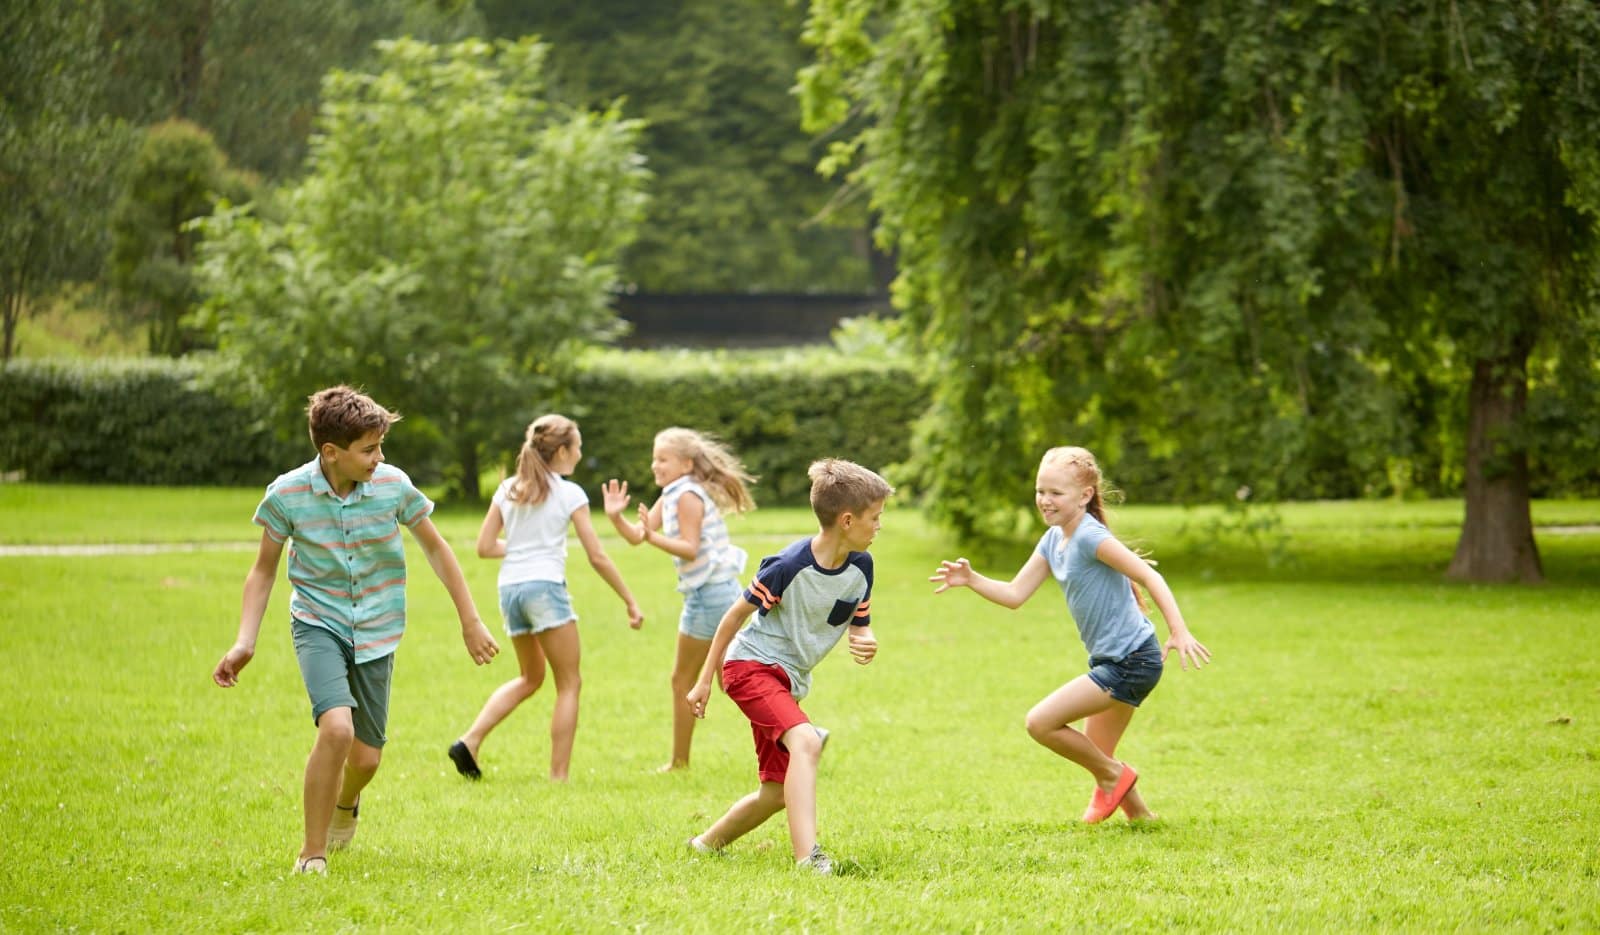 Image Credit: Shutterstock / Ground Picture <p><span>Tag is an exhilarating game that promotes physical fitness and reflex development. It encourages laughter and joy, essential for reducing stress and building emotional connections between players of all ages.</span></p>